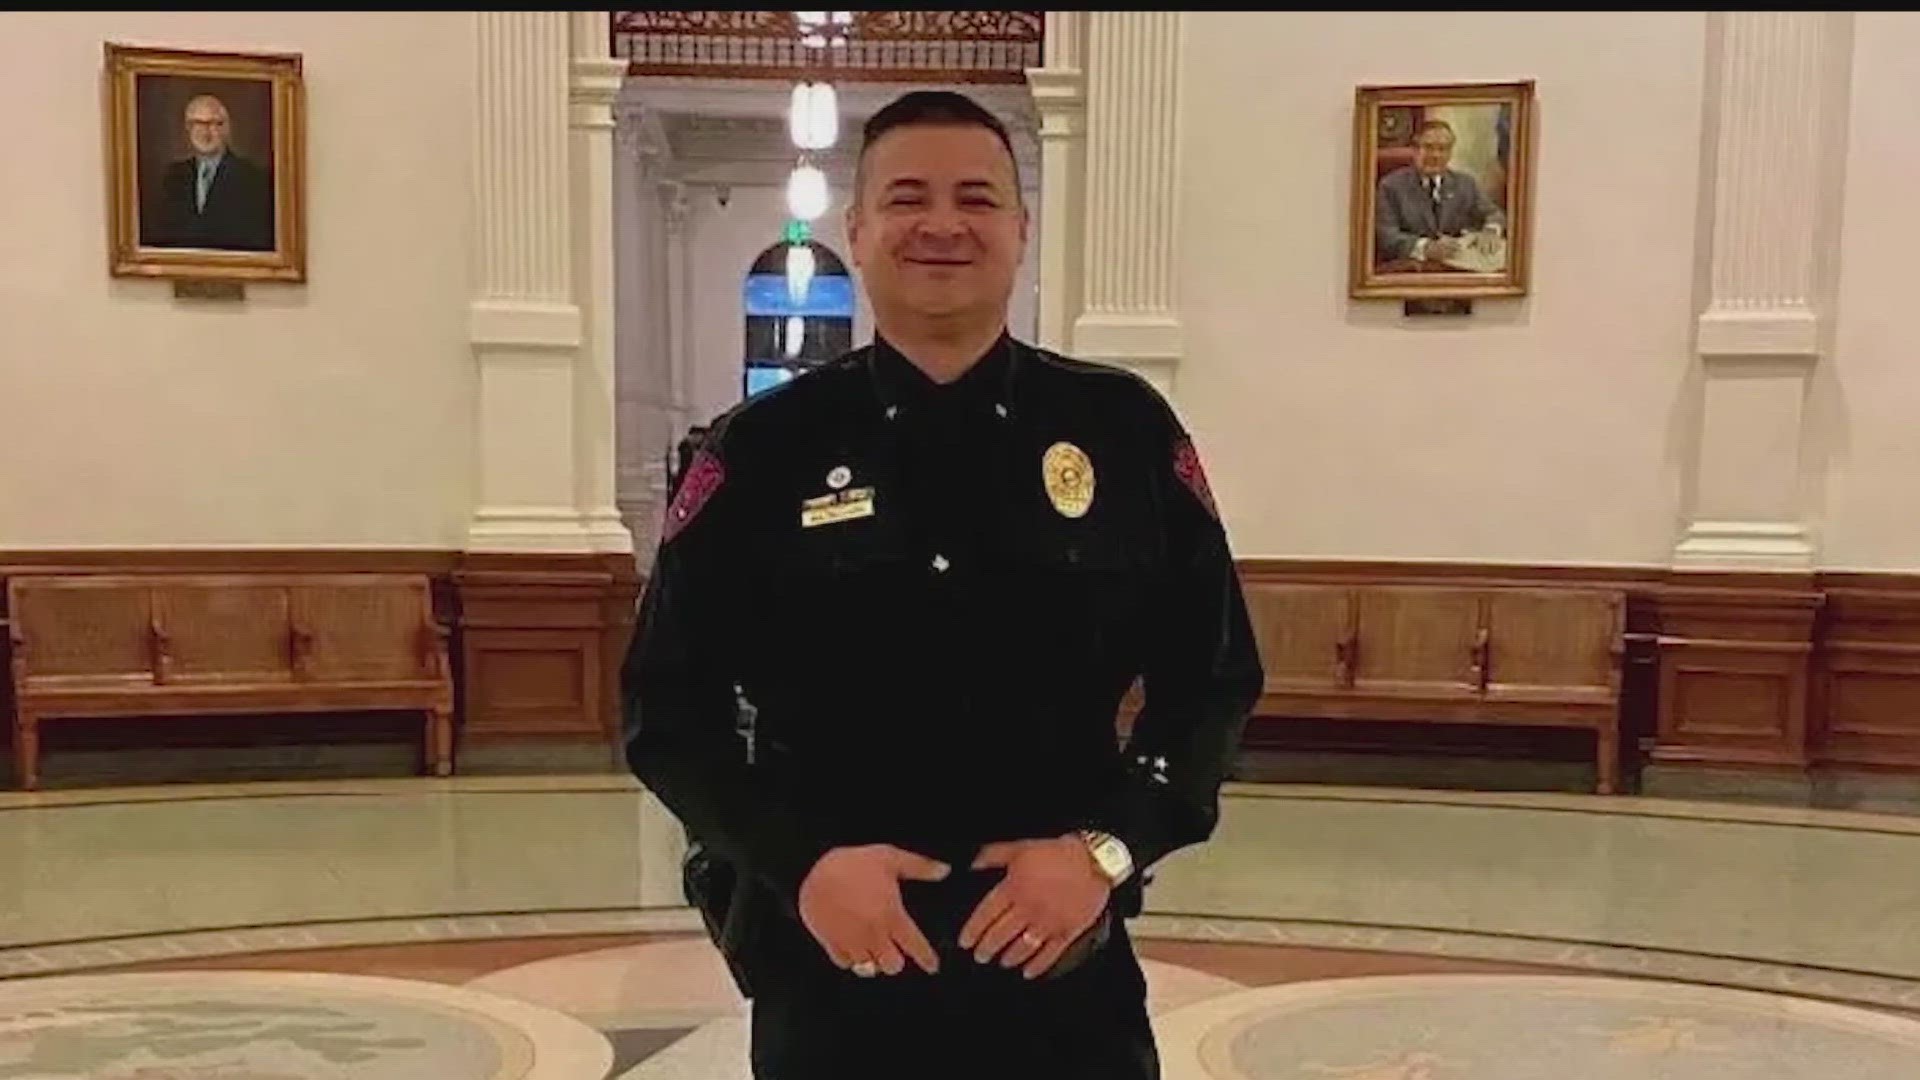 Homer Delgado was serving as interim chief of police after Daniel Rodriguez resigned from the position.